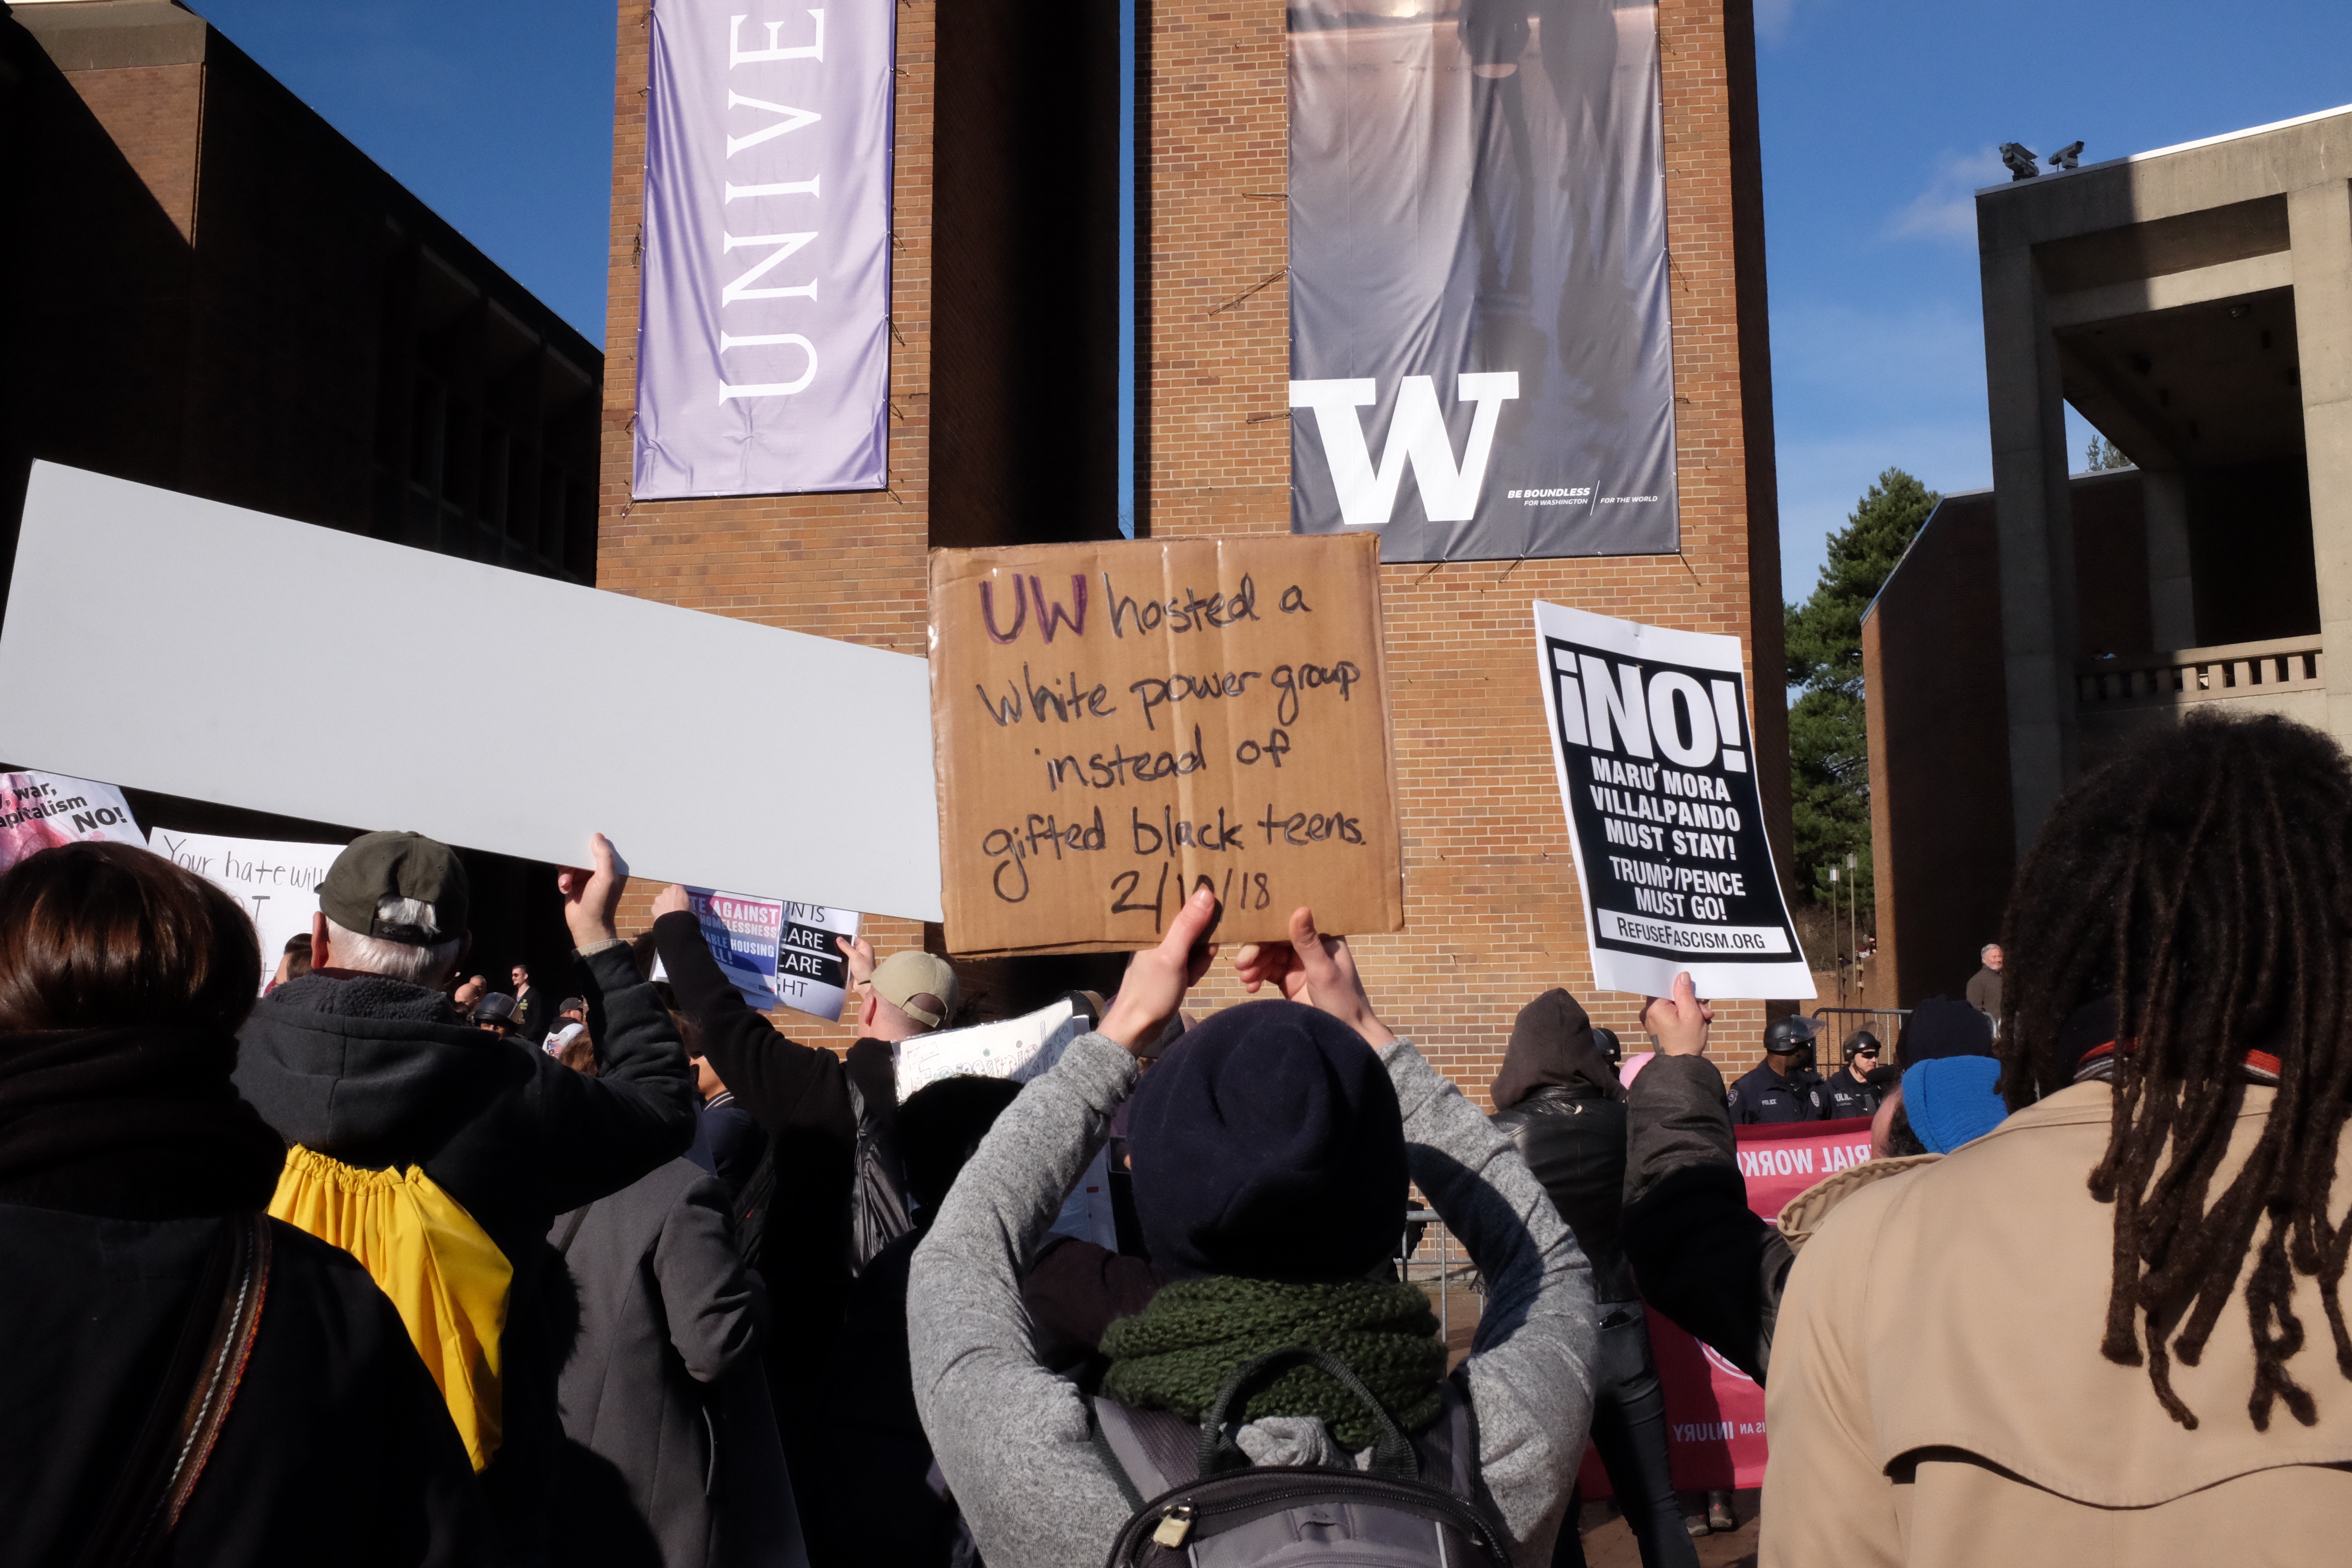 A counter-protester holds a sign that reads "UW hosted a white power group instead of gifted black teens 2/10/18".